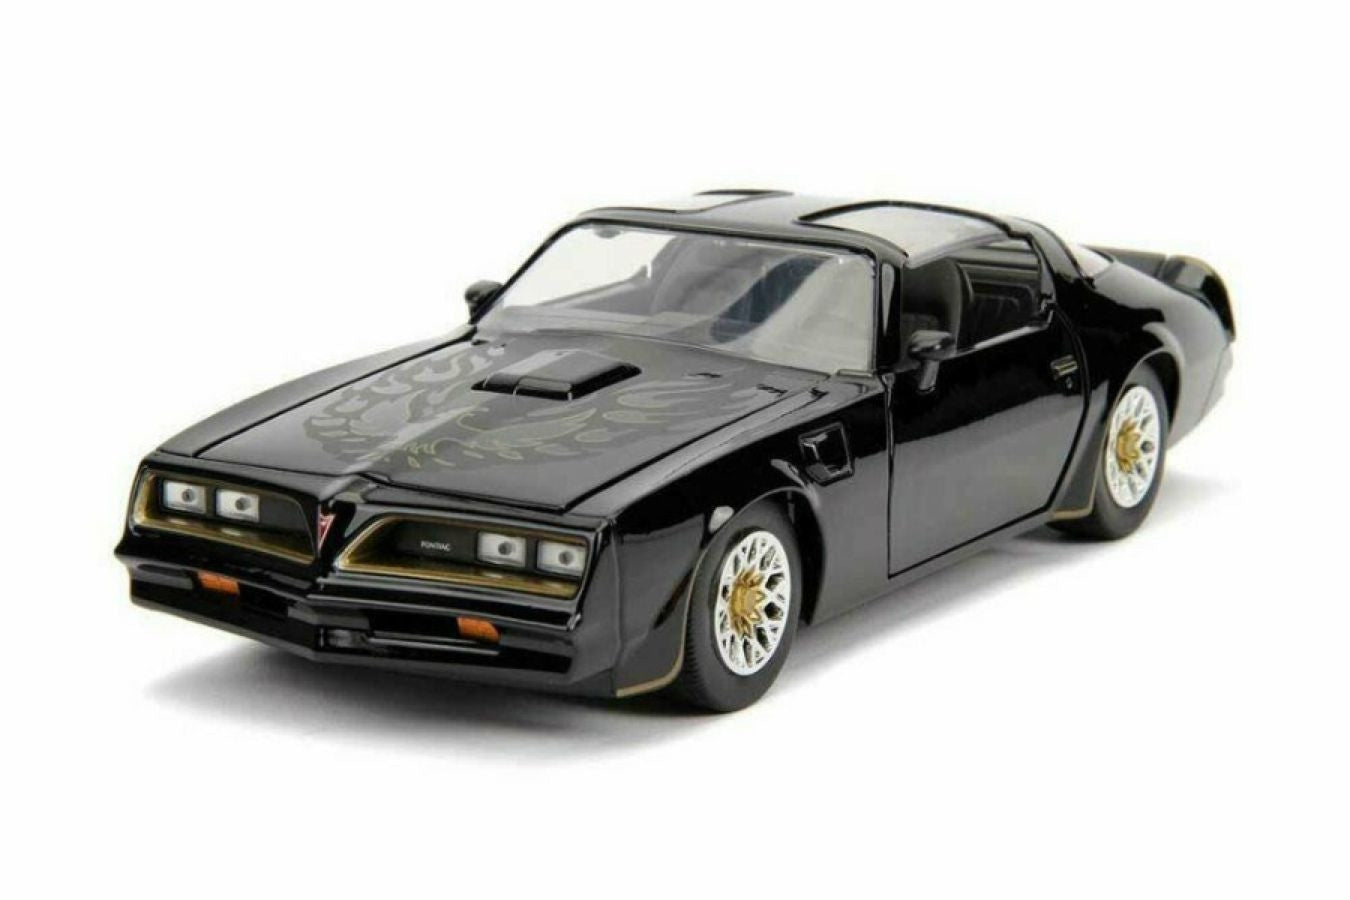 Fast and Furious - 1977 Pontiac Firebird 1:24 Scale Hollywood Ride